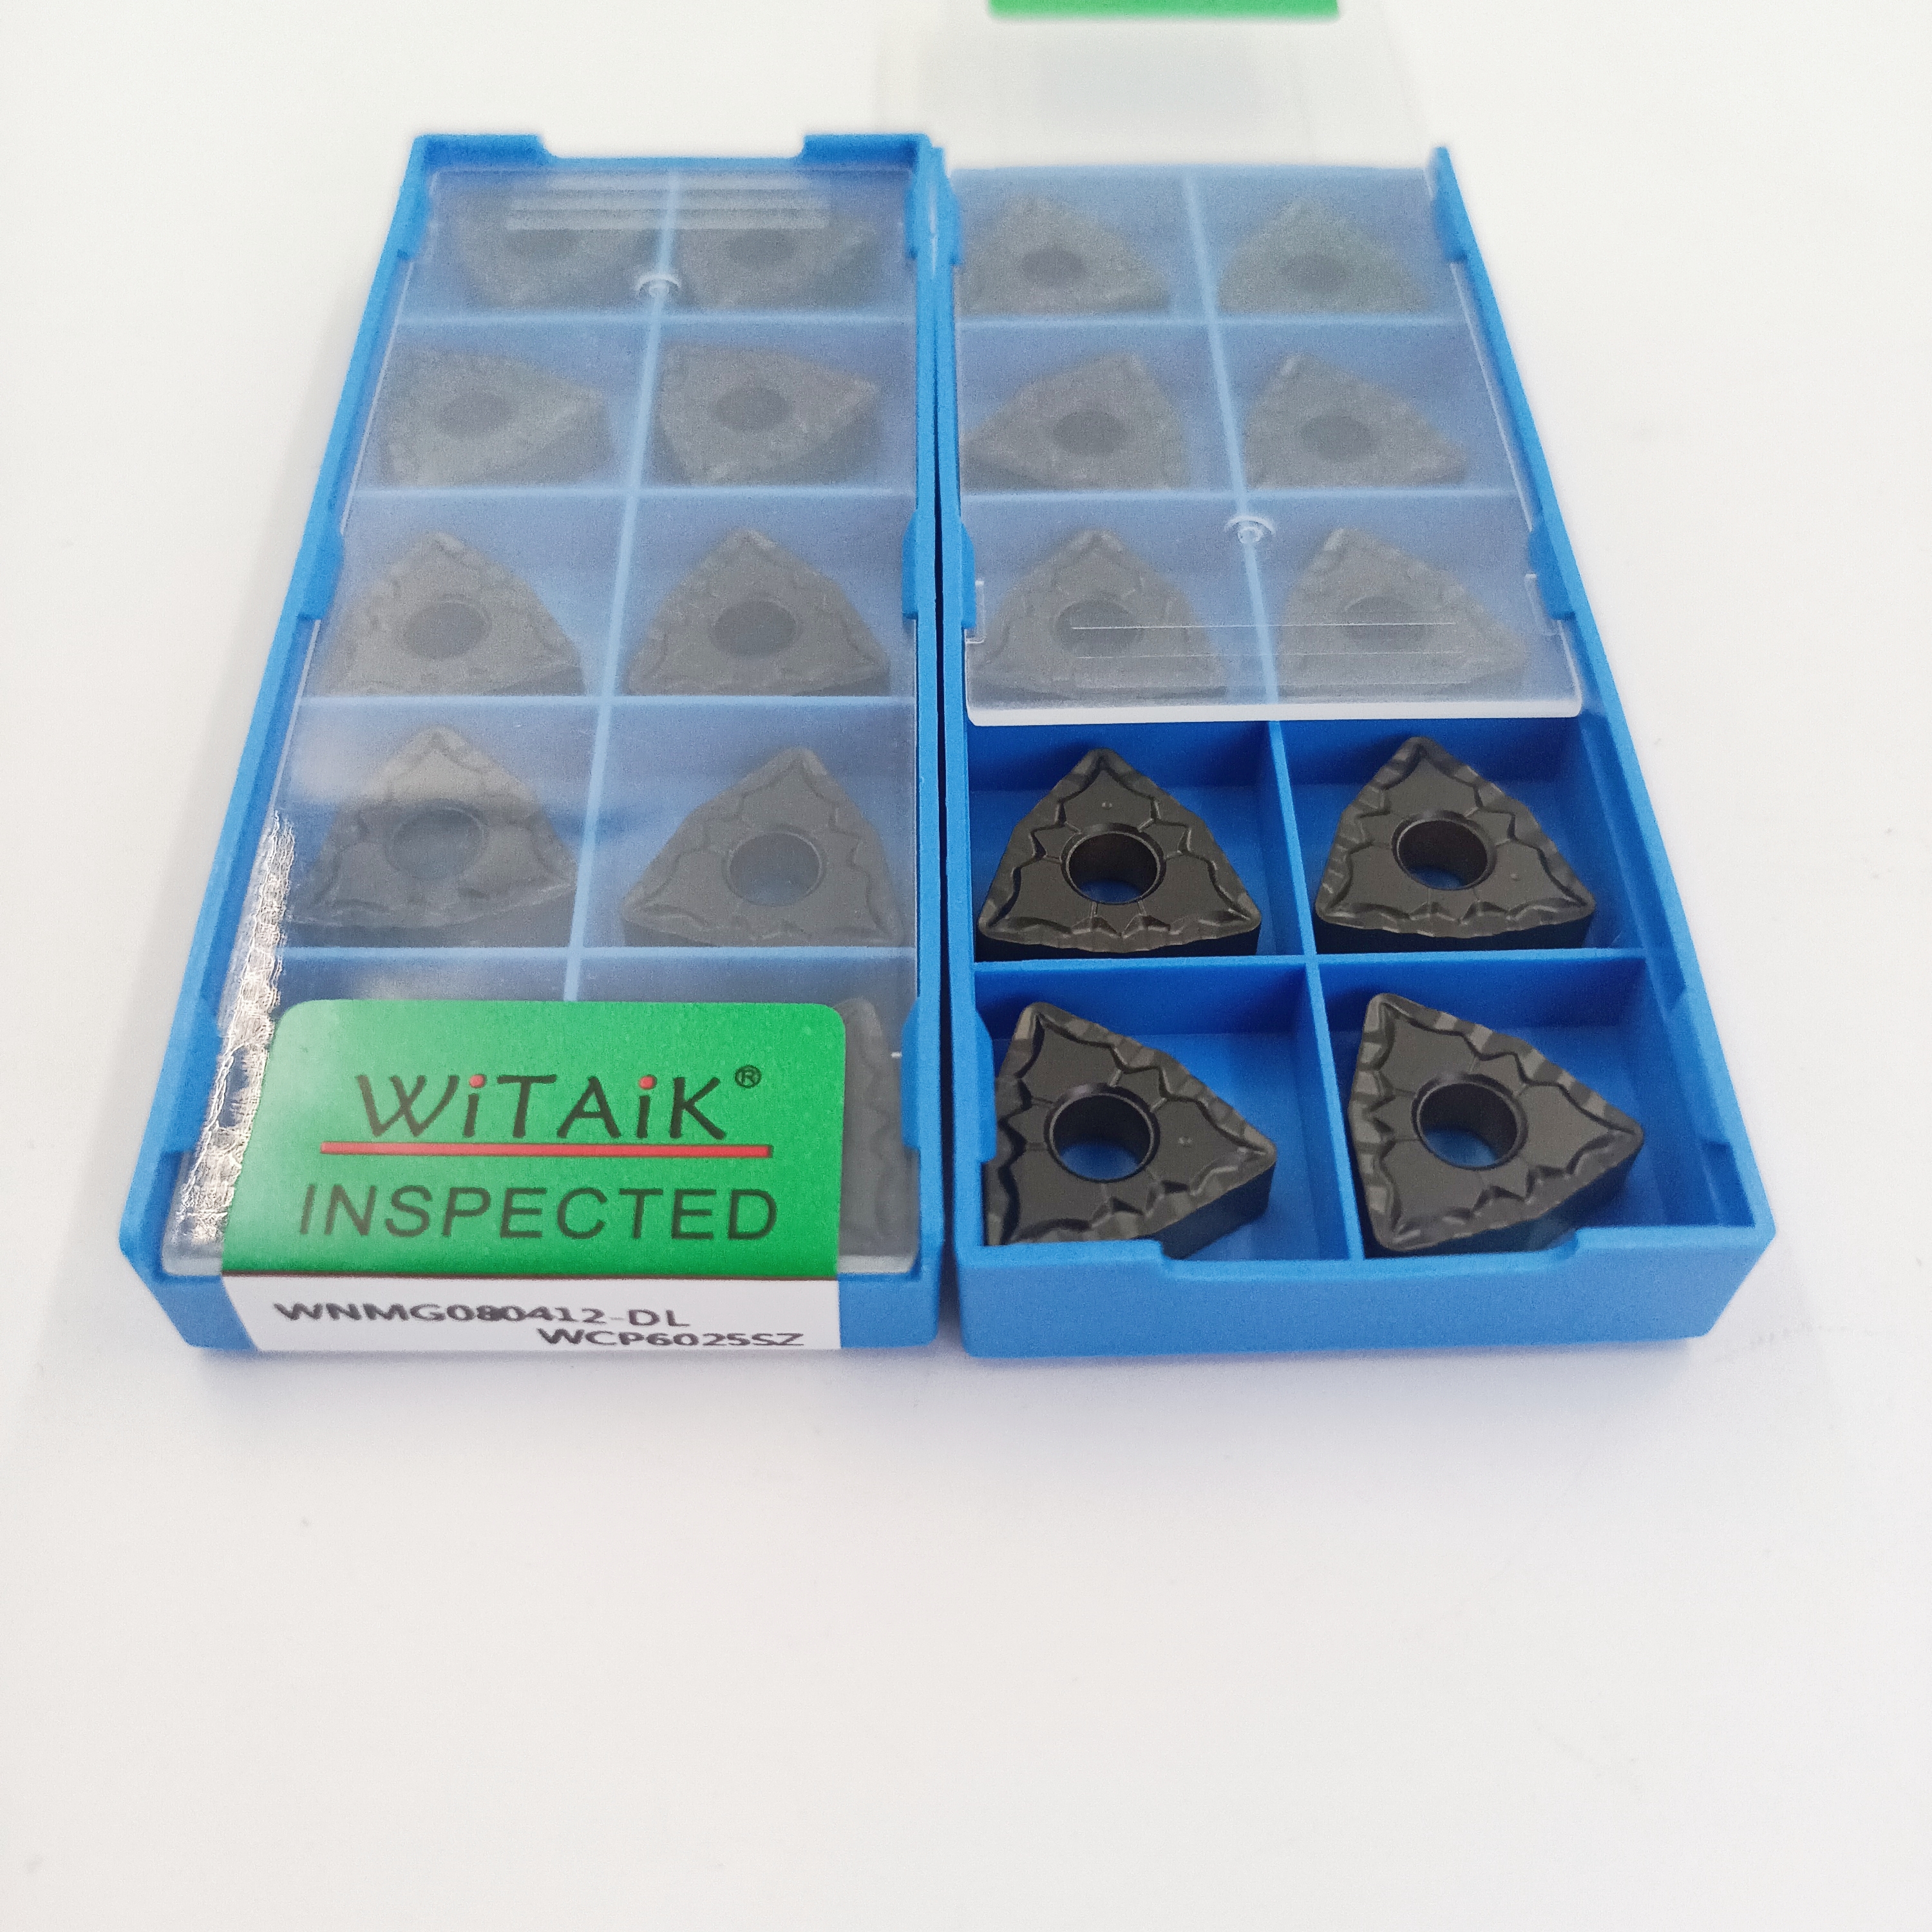 WITAIK High quality WNMG080412-DL WCP6025SZ Steel turning Carbide Inserts